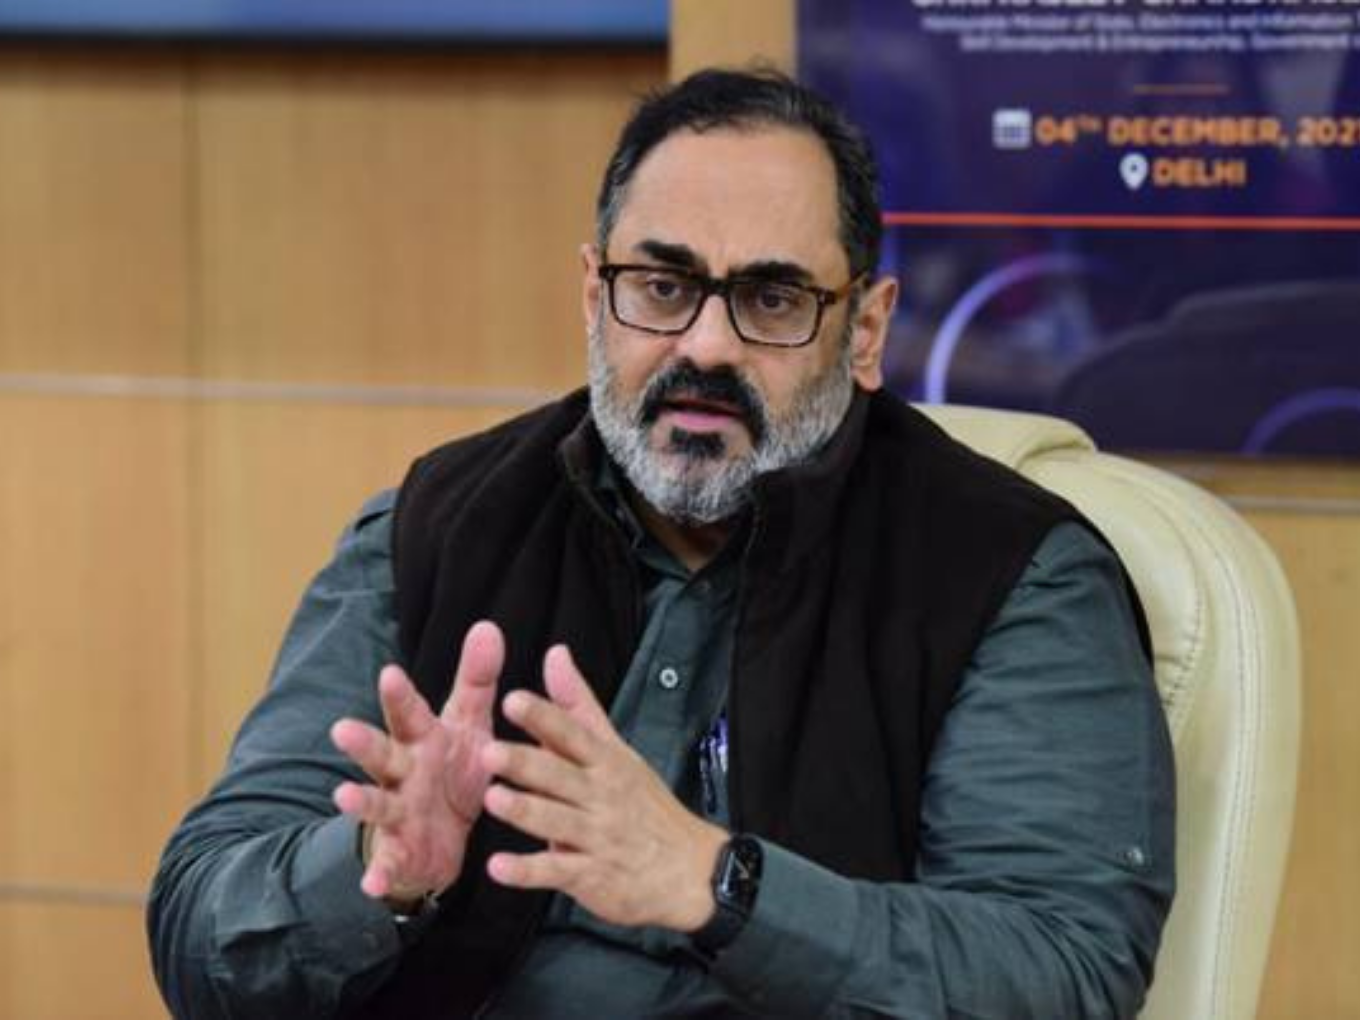 We’ll Have Over 1,000 Unicorns In Next 2, 3 Years: Rajeev Chandrasekhar